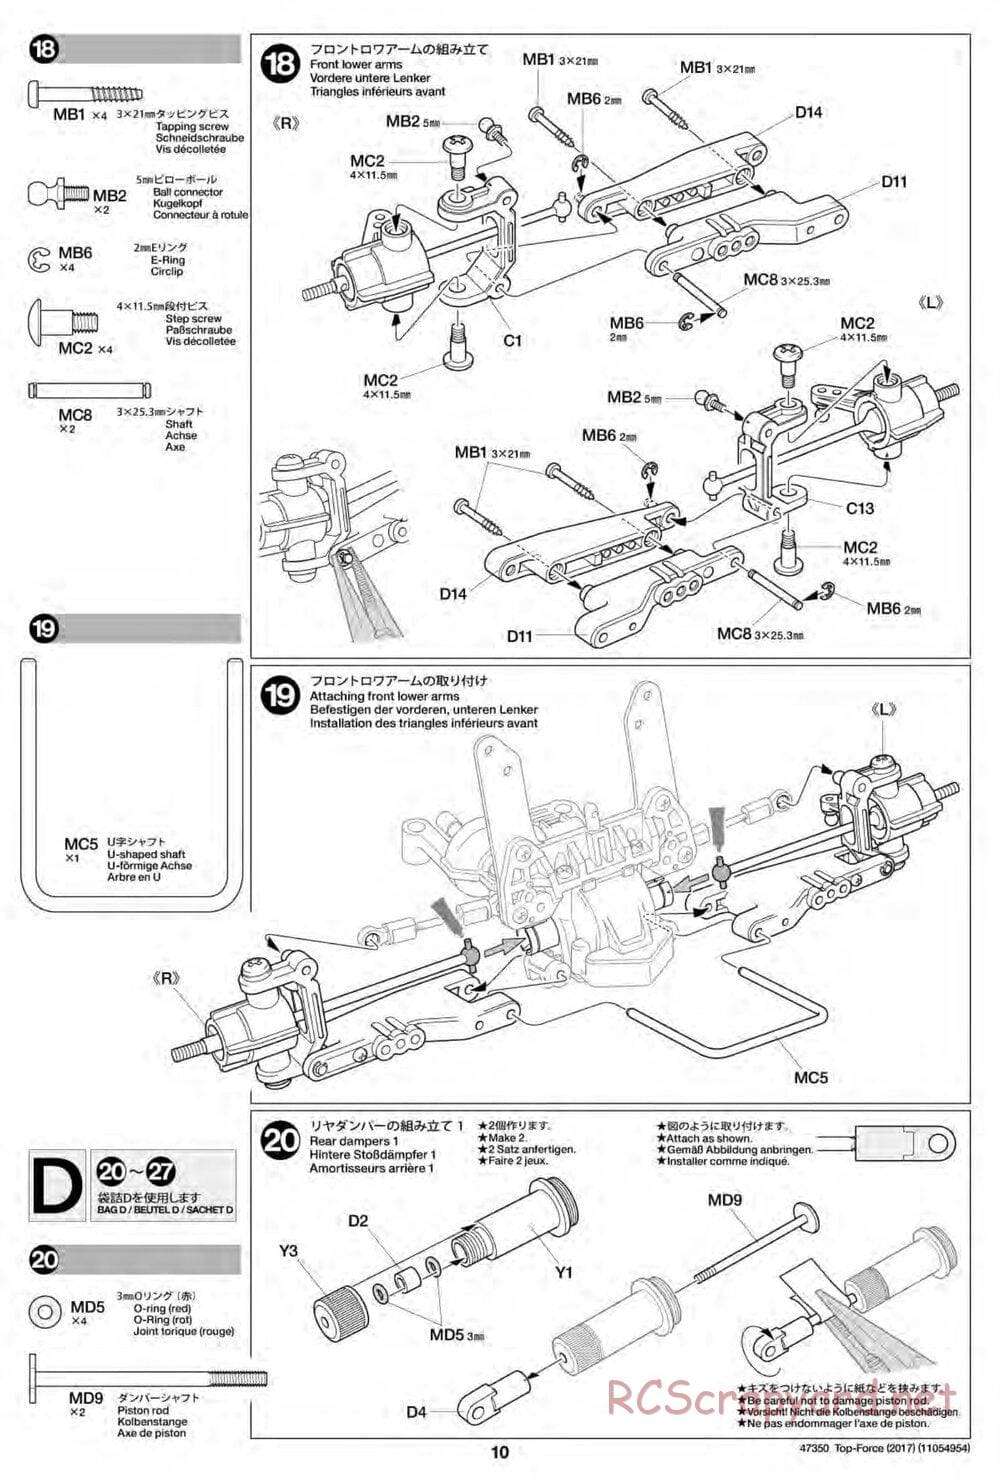 Tamiya - Top Force 2017 - DF-01 Chassis - Manual - Page 10